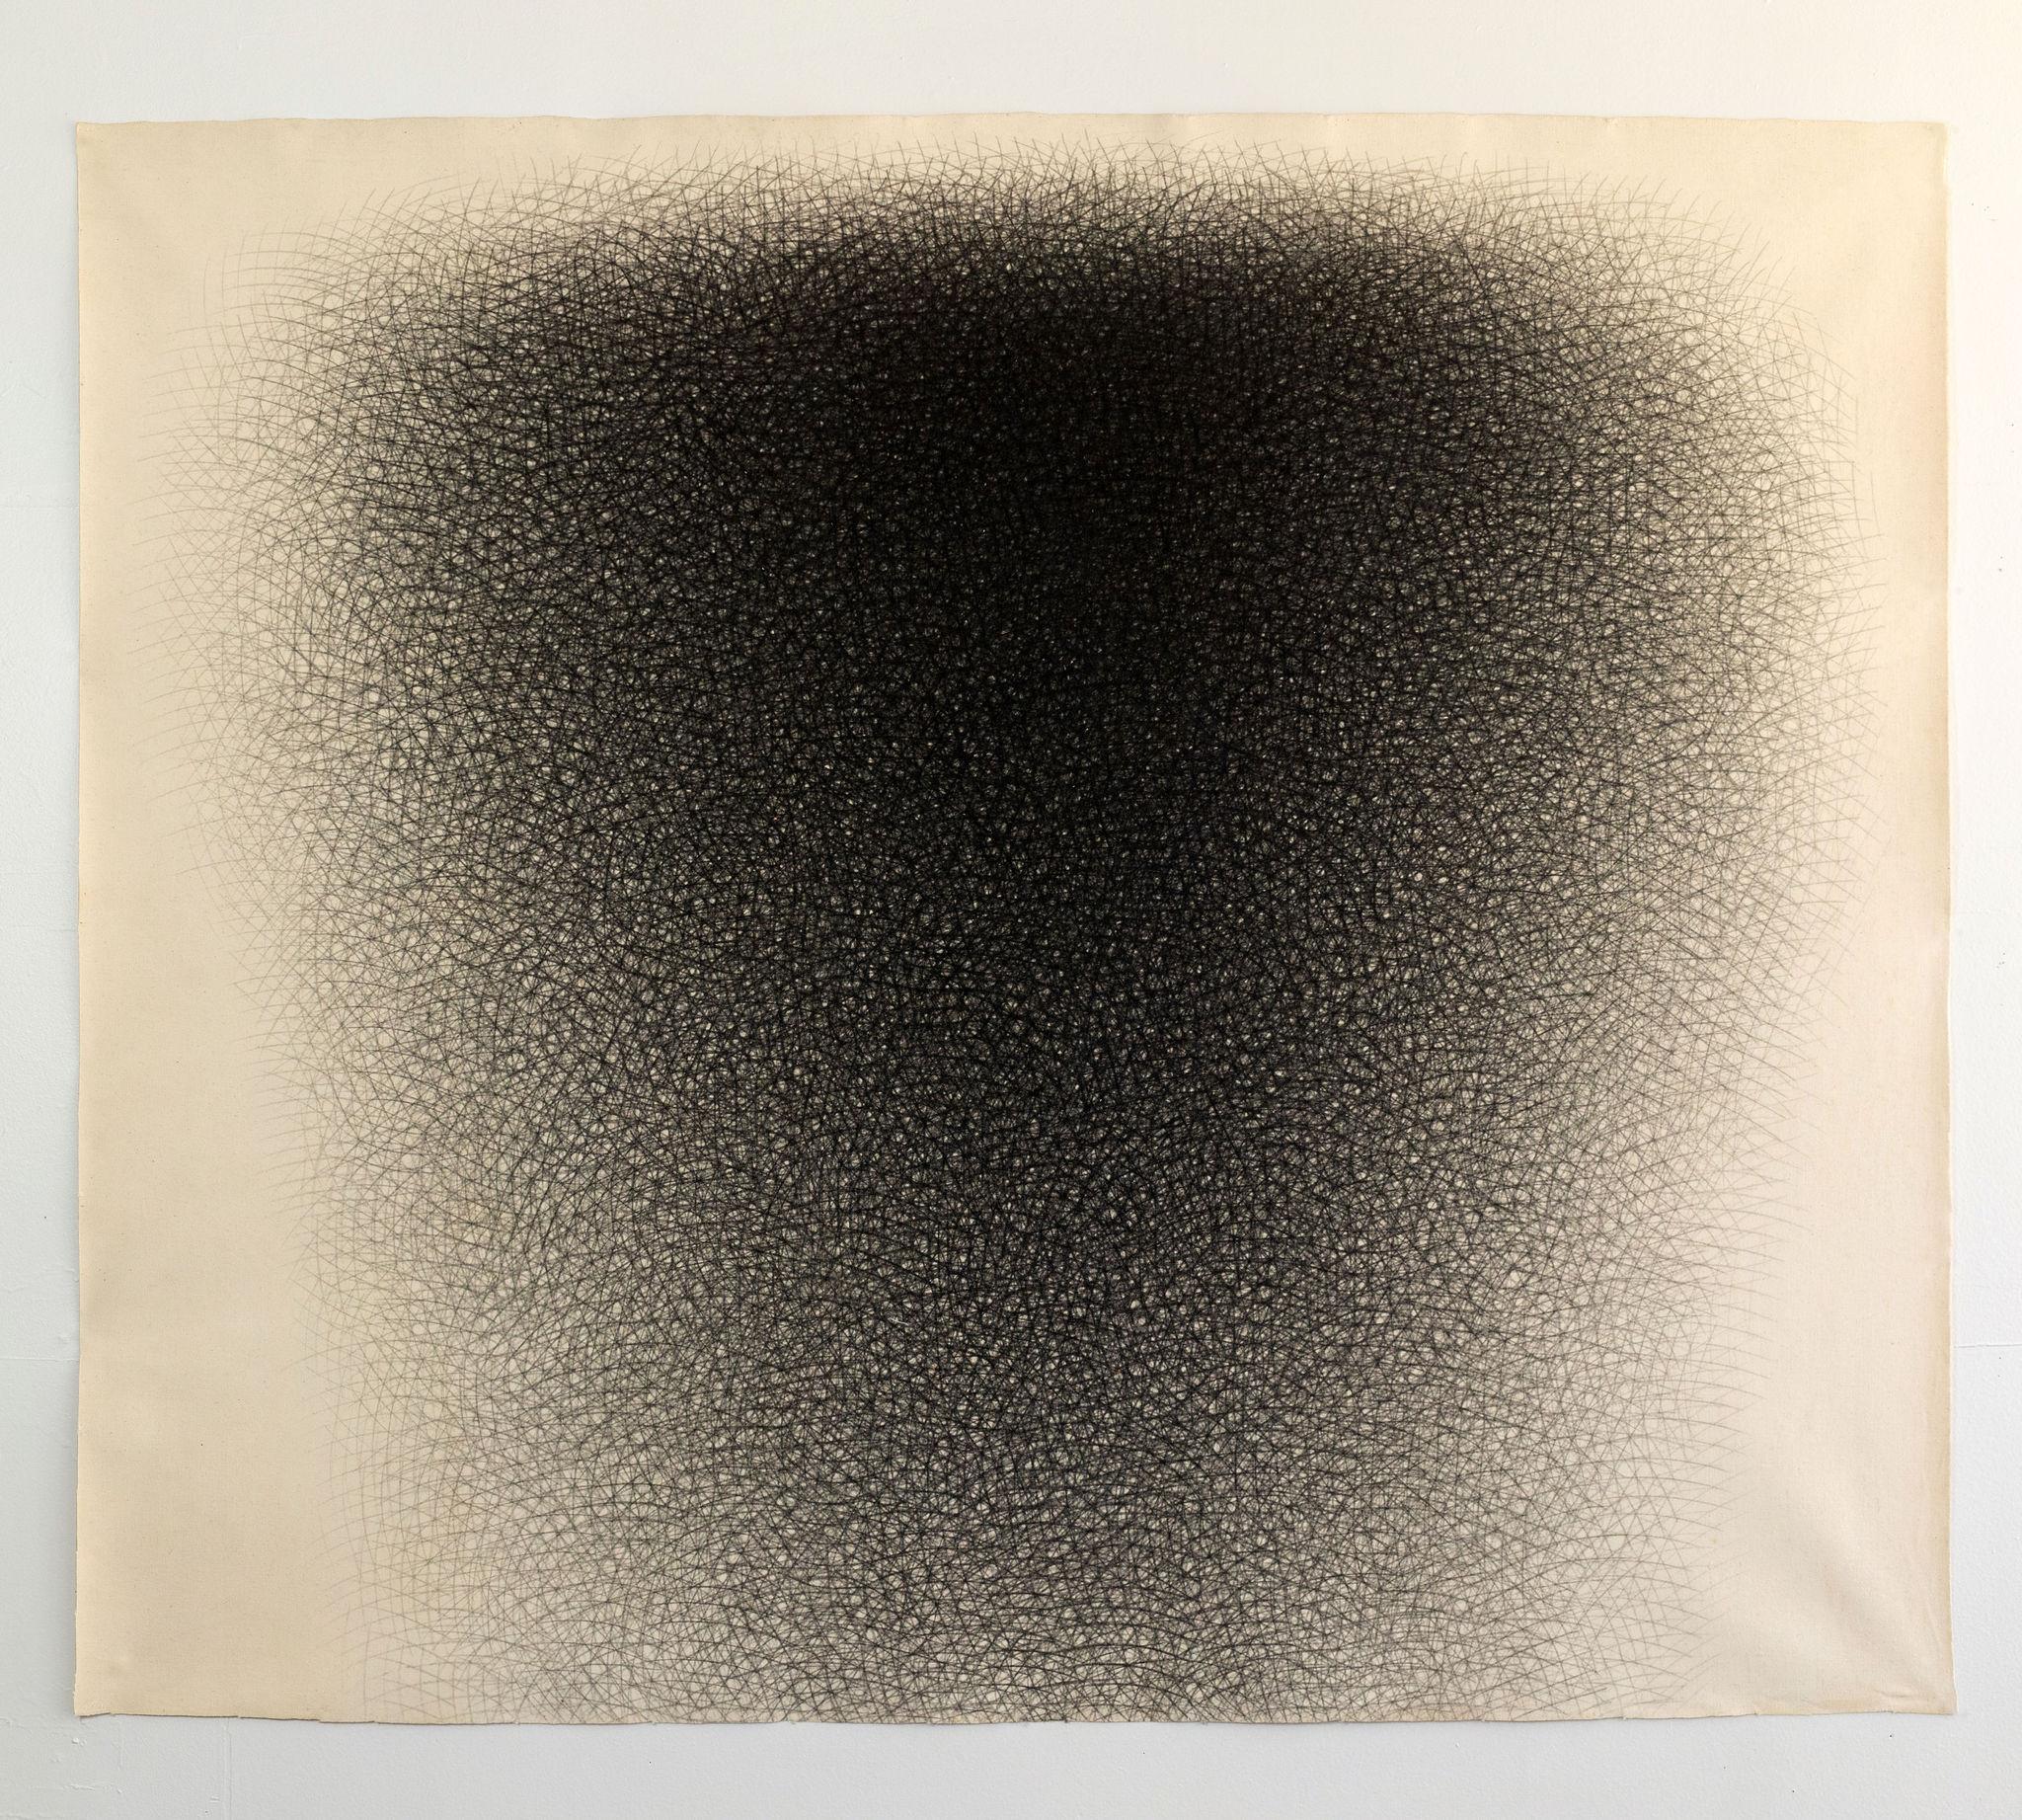 Jack Scott
"T-Blur"
3-27-77
Charcoal on unprimed canvas sprayed with custom fixative
69"x59.5" unstretched 
Installation: This piece is intended to be stretched and stapled  without a frame. 
Signed, titled and dated in pencil on reverse 

Excellent